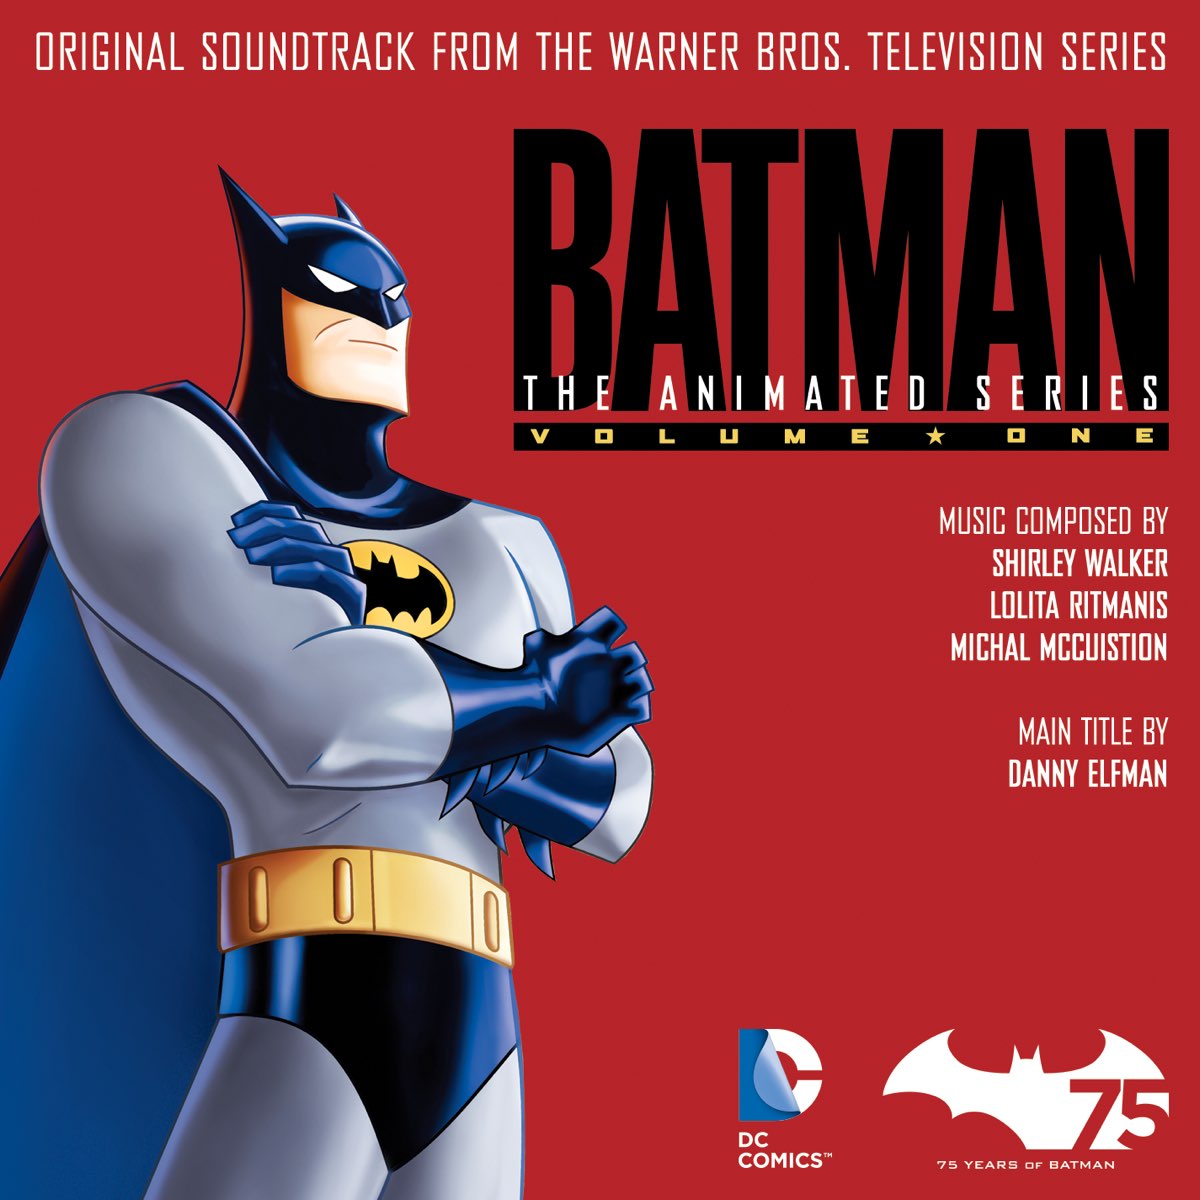 Batman: The Animated Series, Vol. 1 (Original Soundtrack from the Warner  Bros. Television Series) by Various Artists on Apple Music